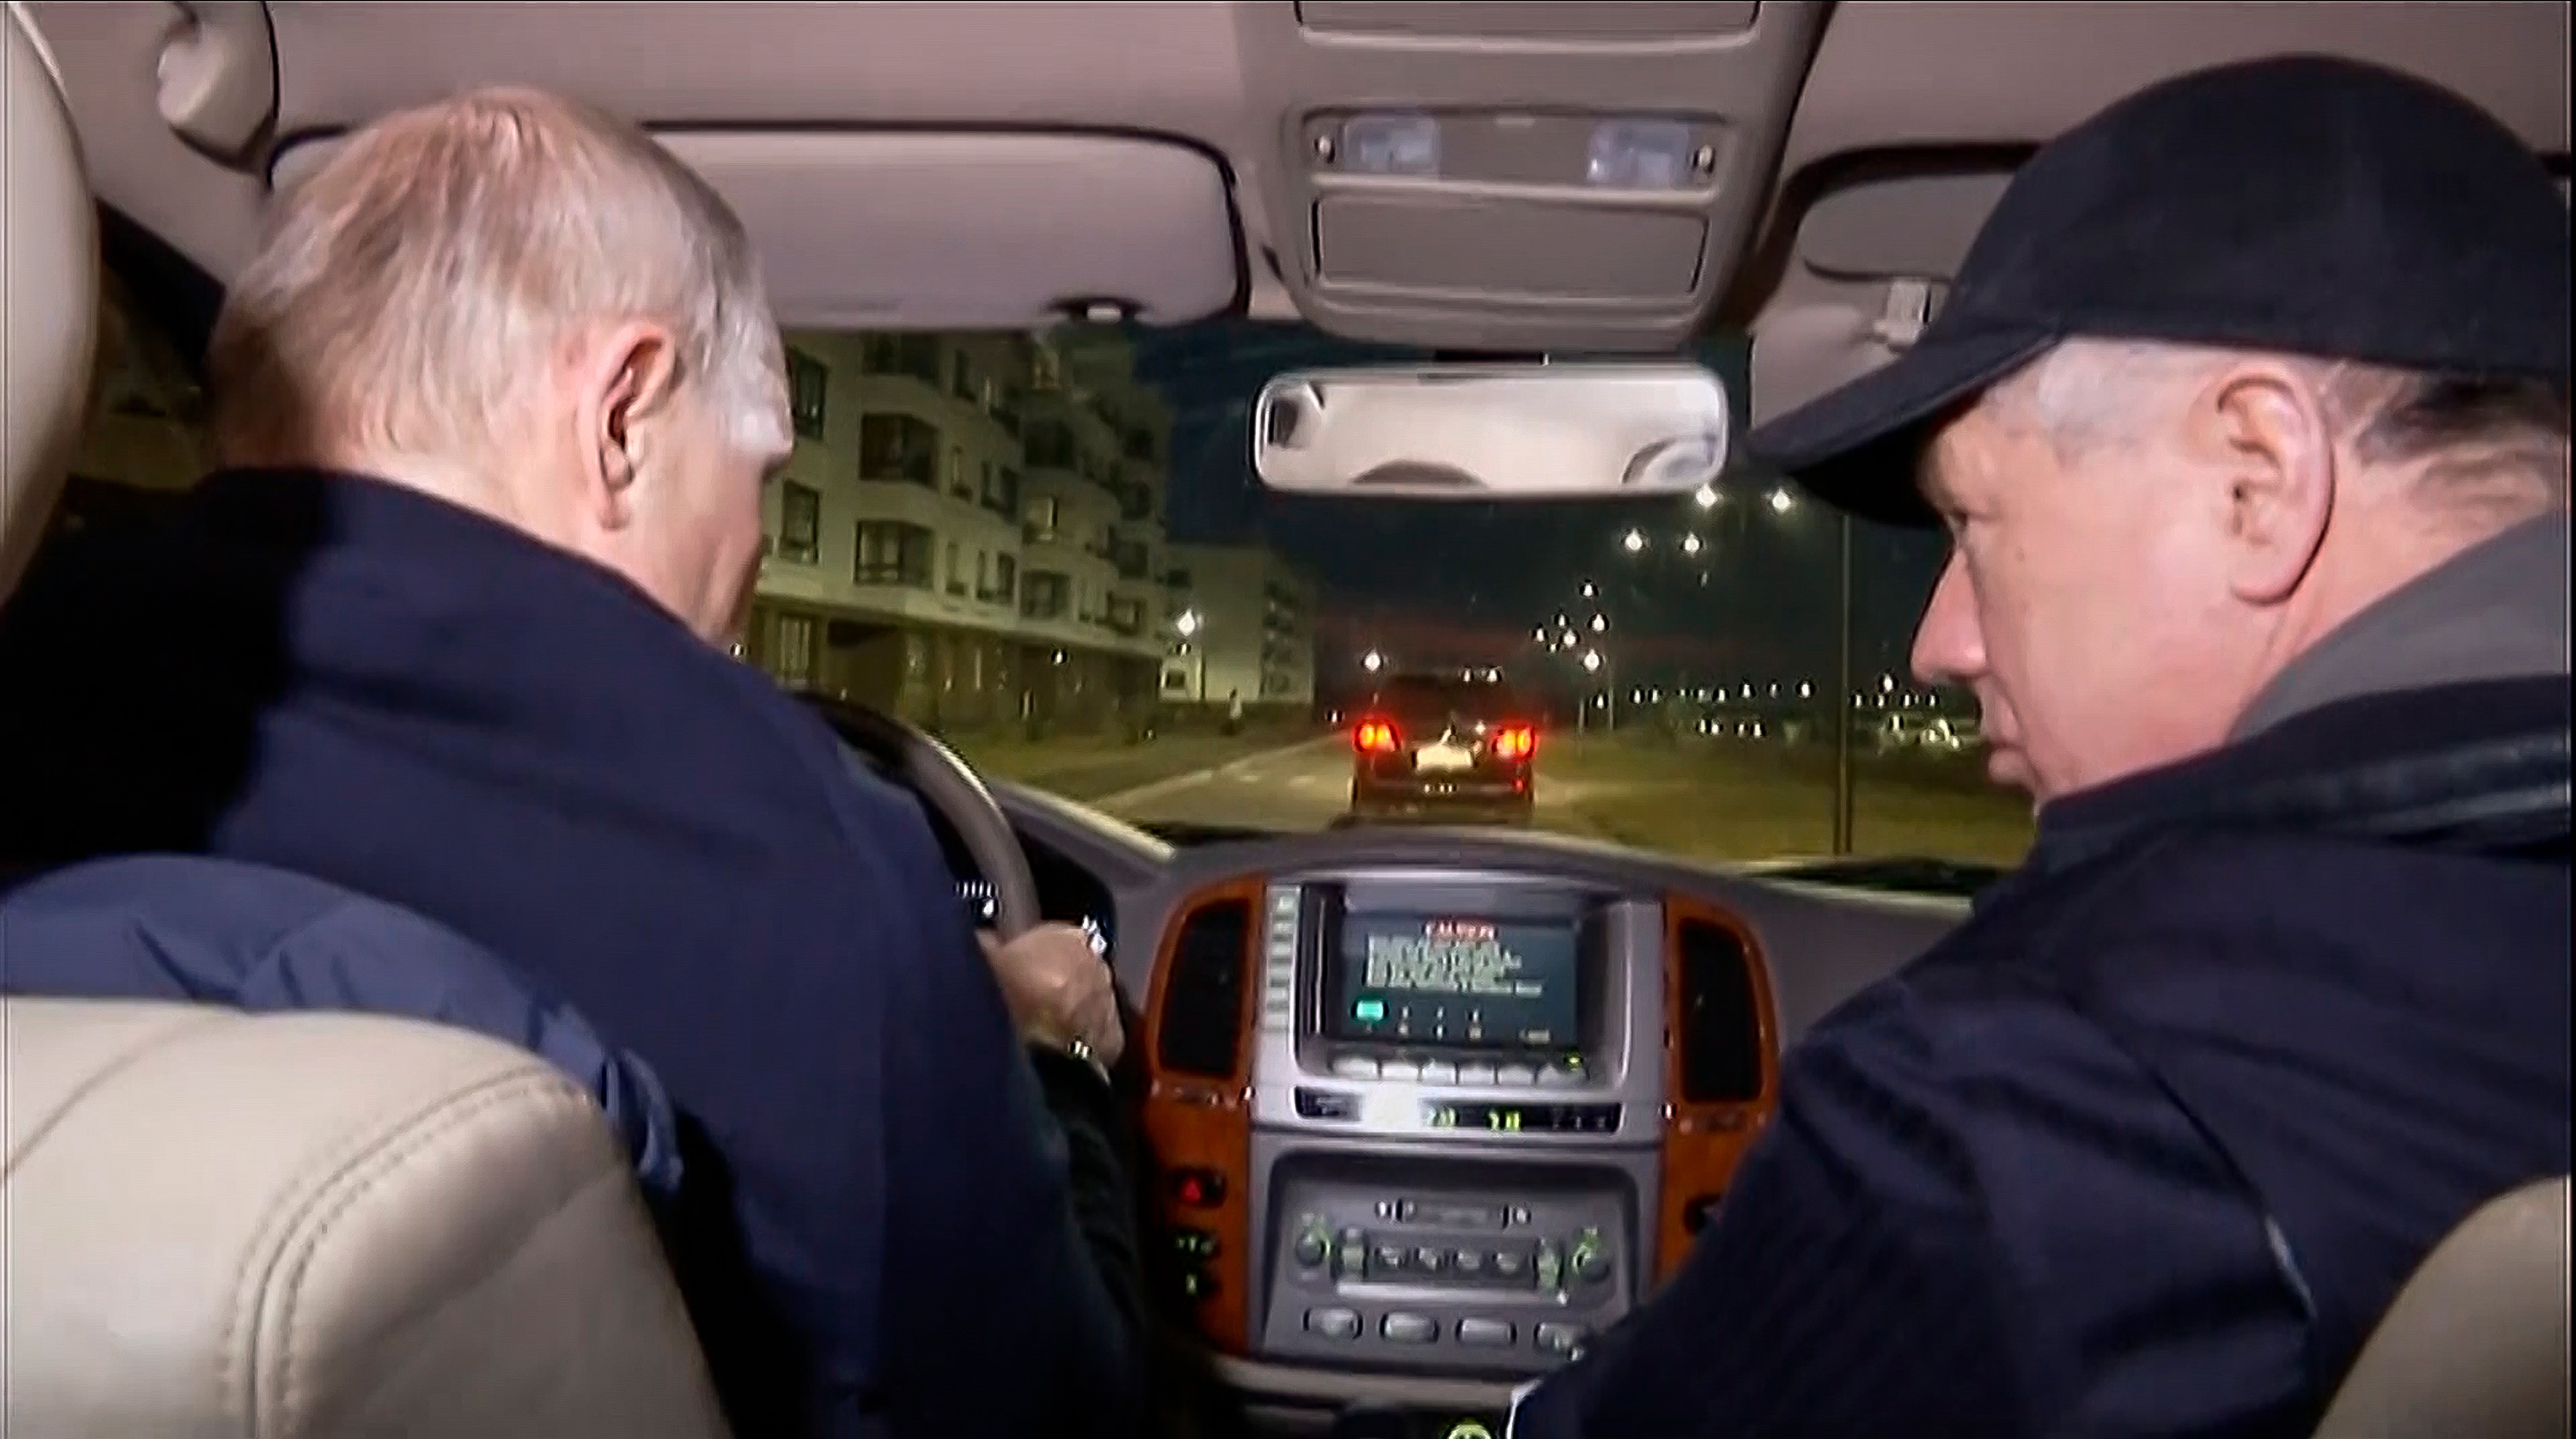 Russian President Vladimir Putin, left, drives with Russian Deputy Prime Minister Marat Khusnullin during their visit to Mariupol, Ukraine, in a video released on March 19.